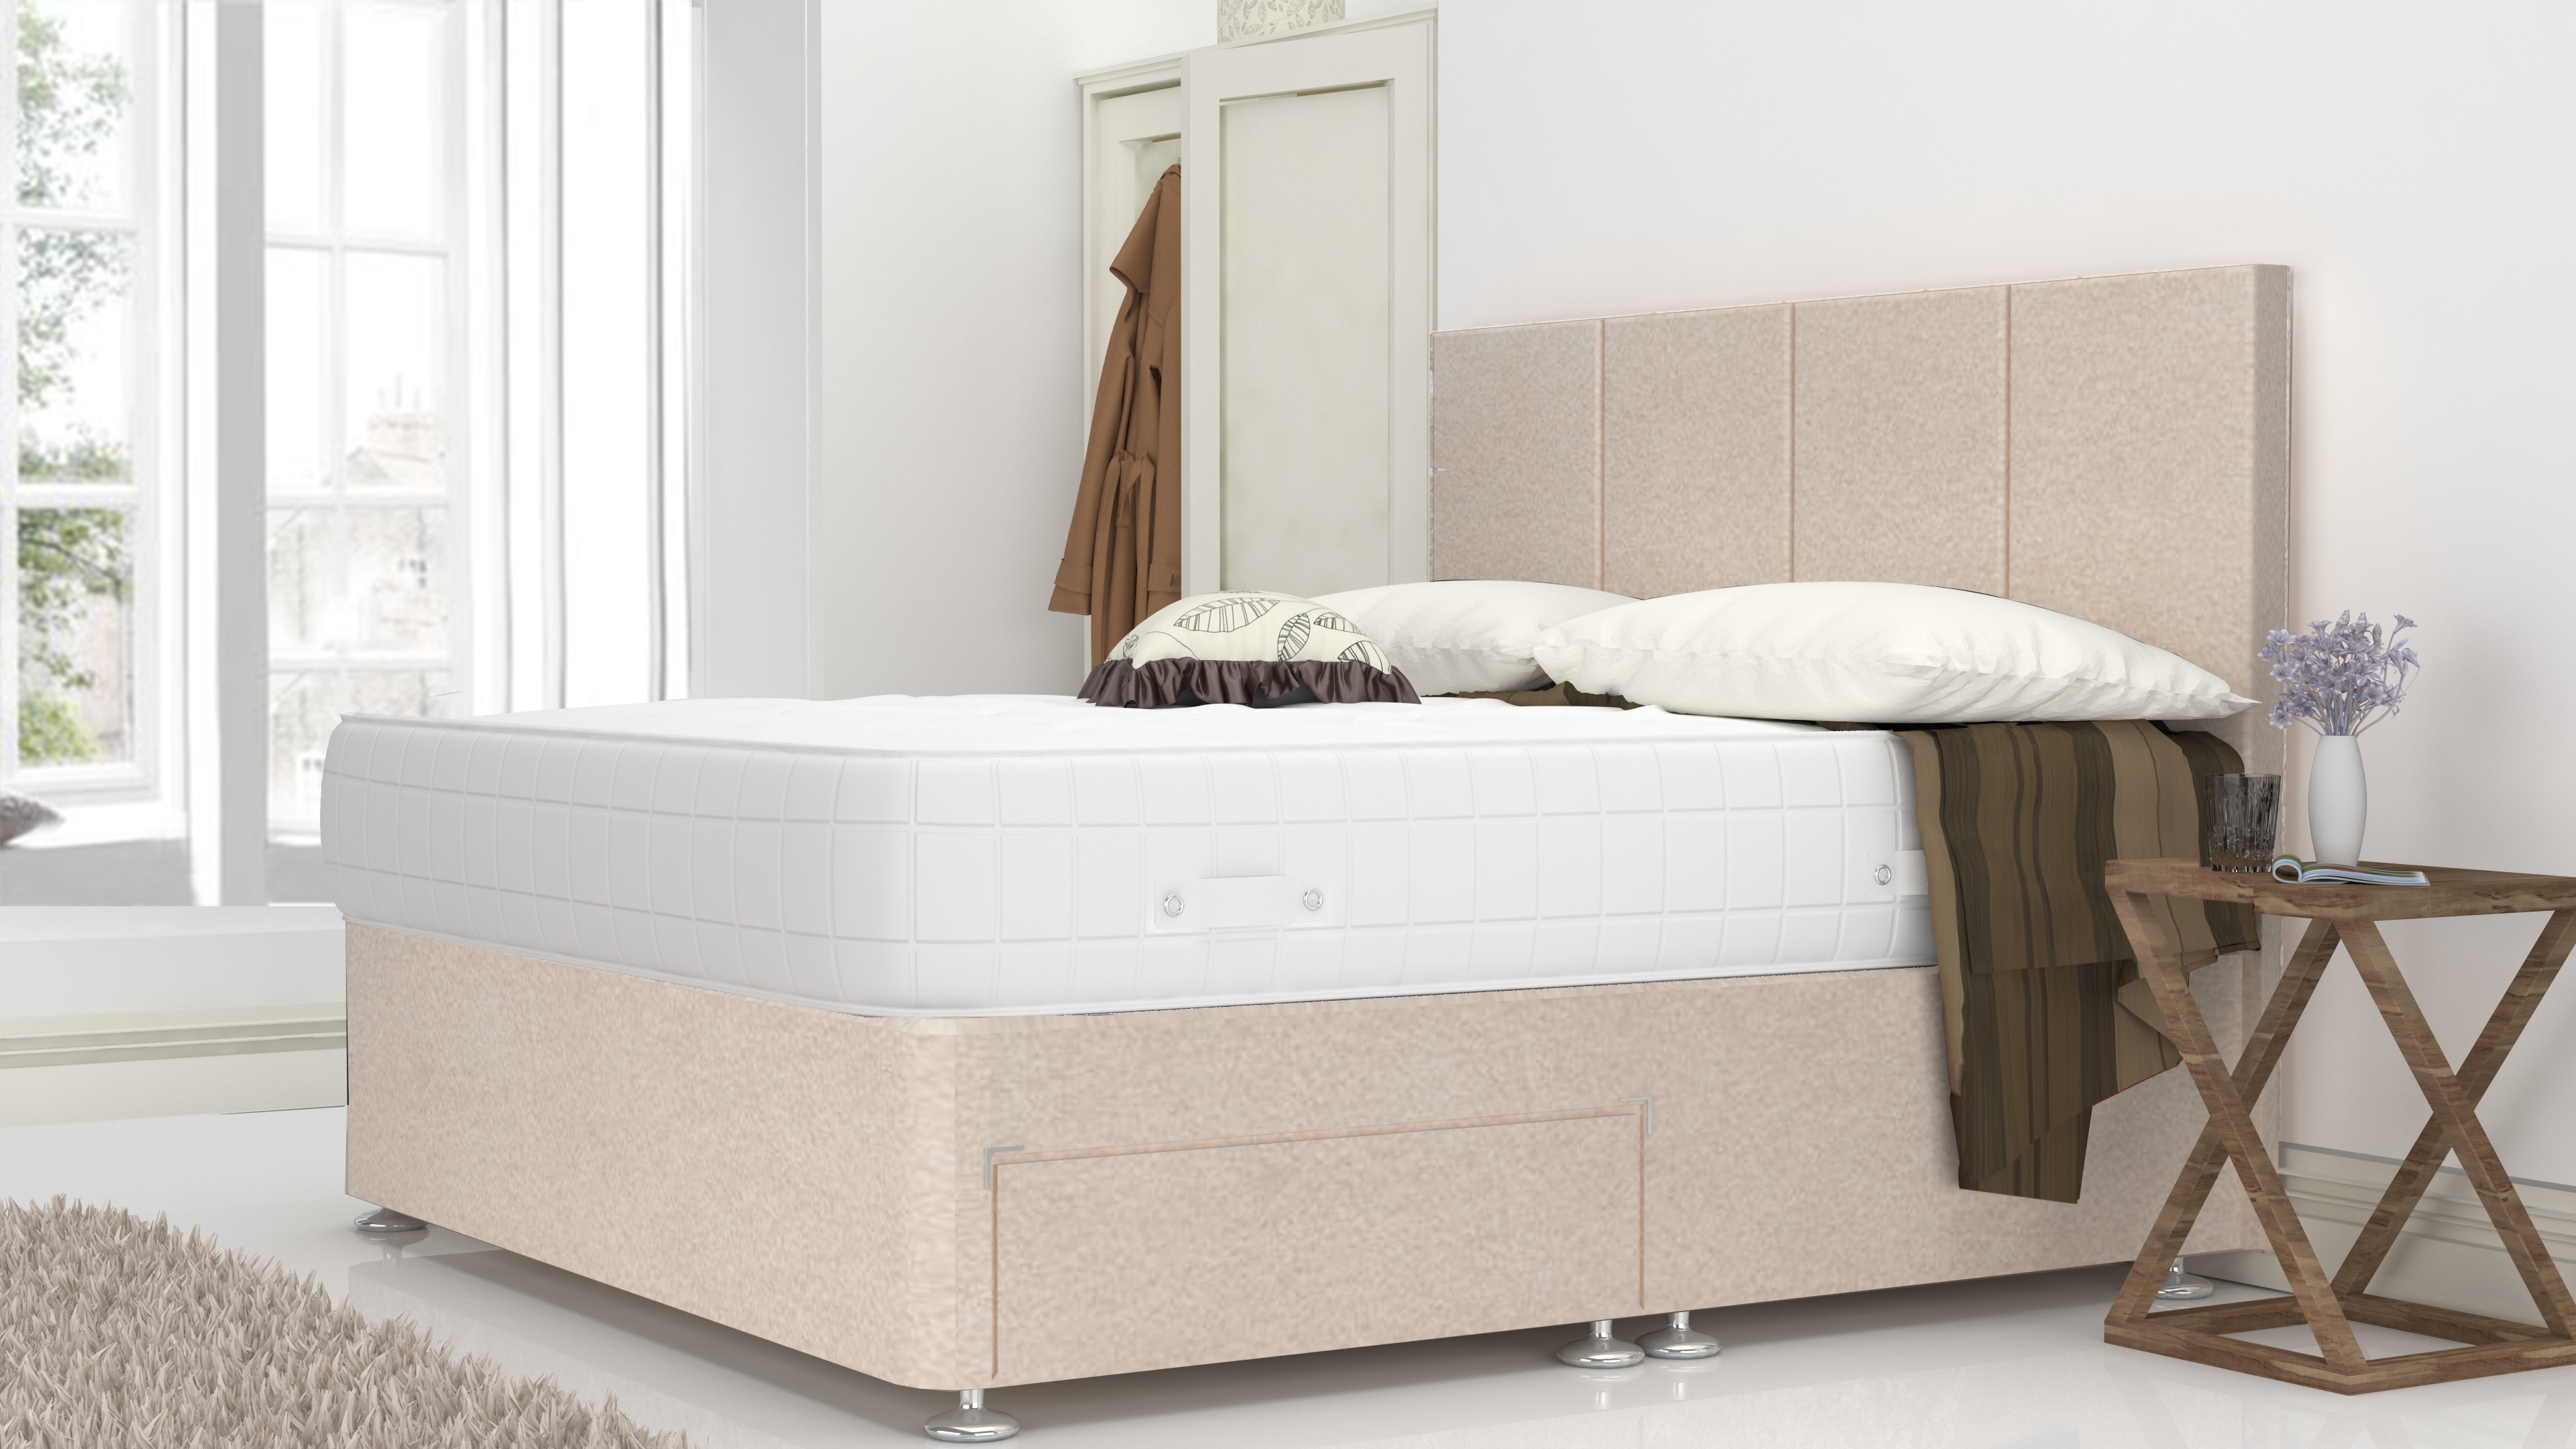 Cream Chanille 5 Feet Divan Bed Set With 4 Panel Headboard (Included Feet) And Free Tinsel Top Mattress